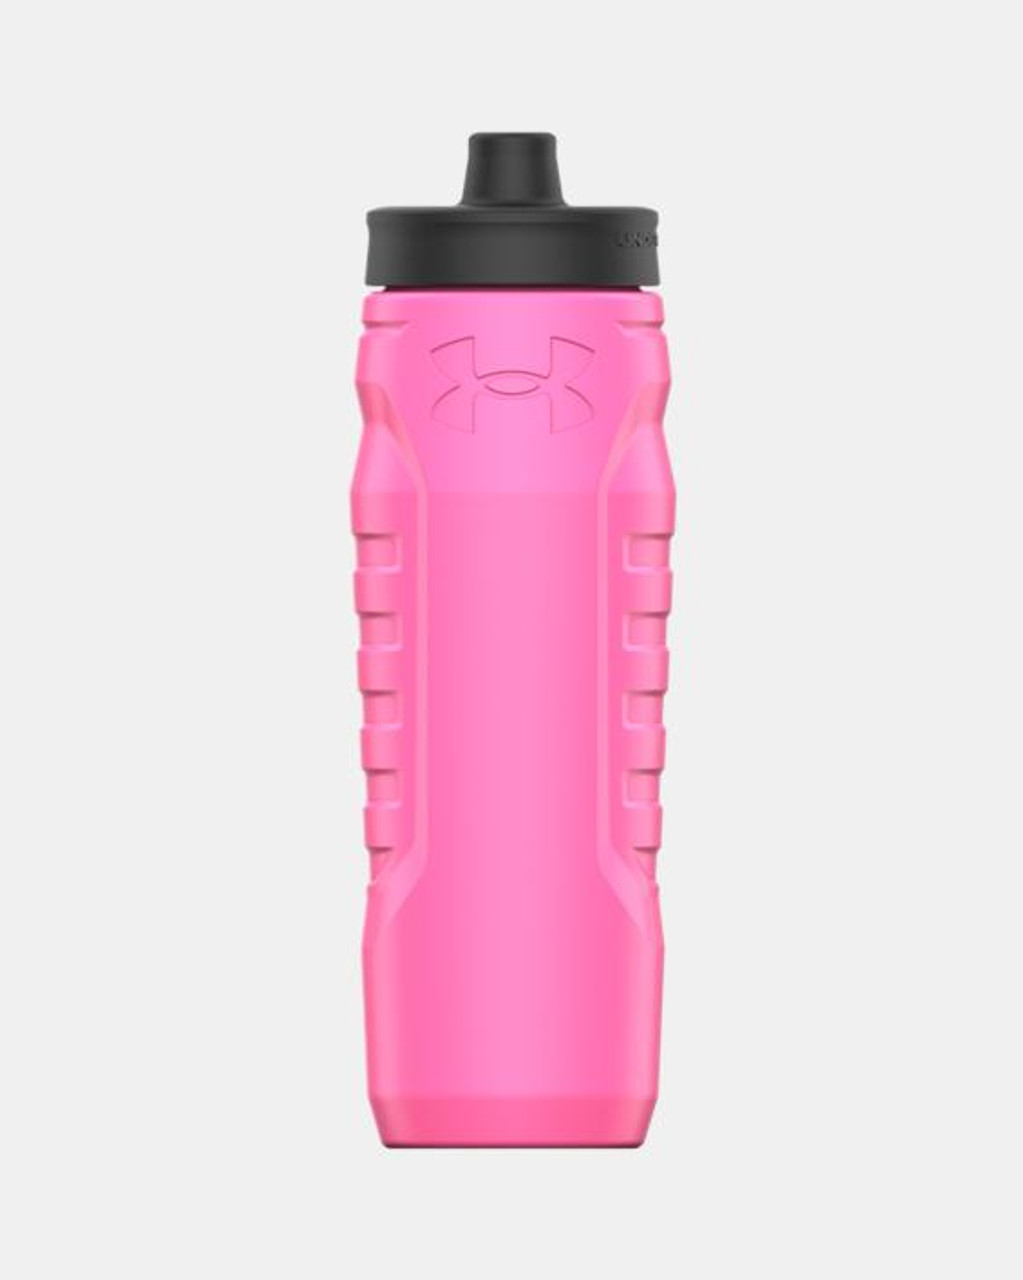 32-Ounce Under Armour Sideline Squeezable Water Bottle (Red) $6.75 + Free  Shipping w/ Prime or on $25+